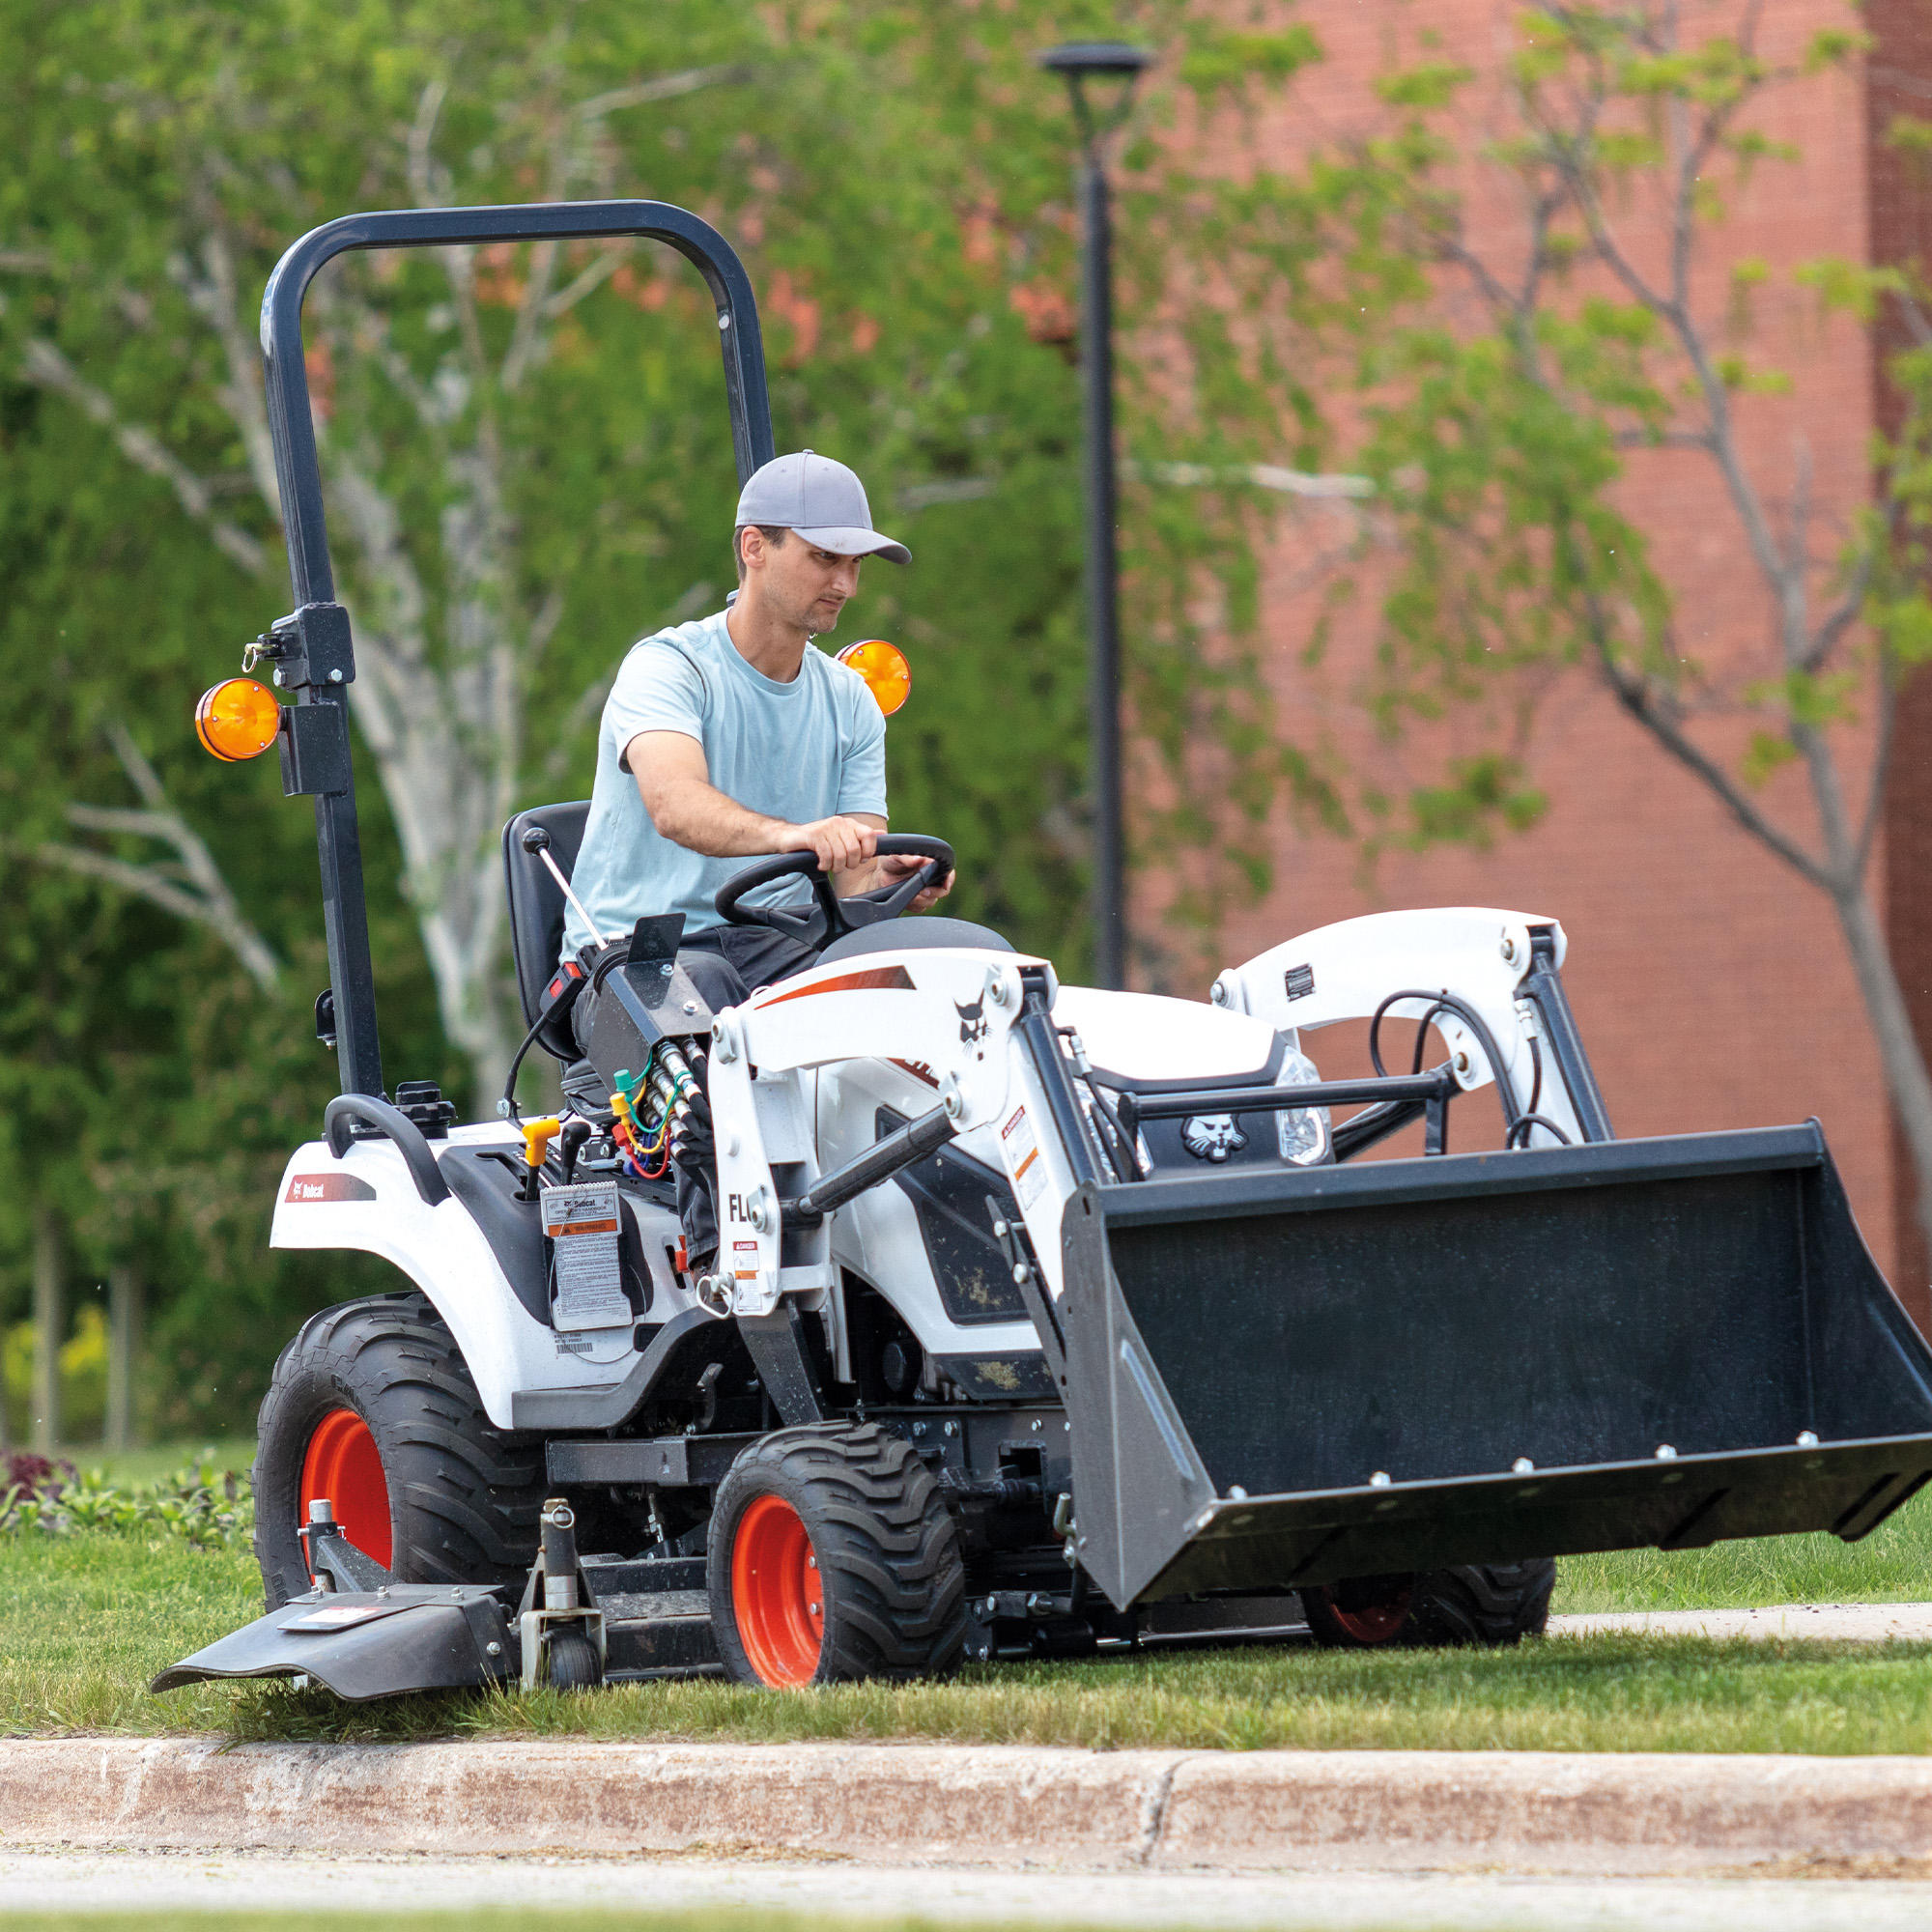 The Bobcat CT1025 with bucket and mid-mount mower Paul Equipment Fredericton (506)449-3289